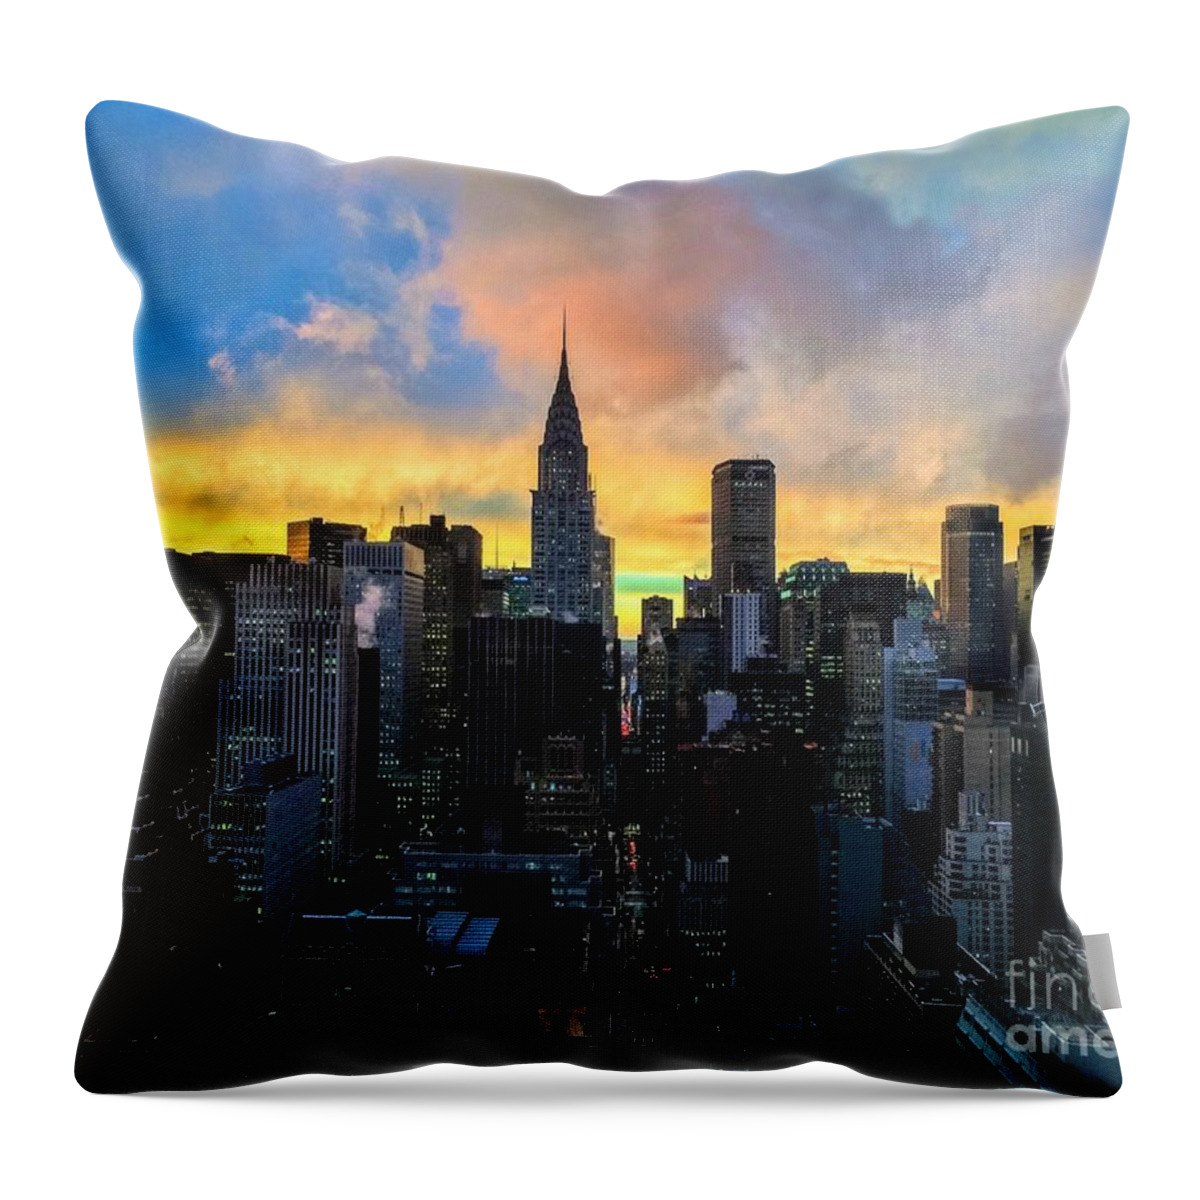 The Colors Of New York Chrysler Building At Dusk Throw Pillow featuring the photograph The Colors of New York - Chrysler Building at Dusk by Miriam Danar